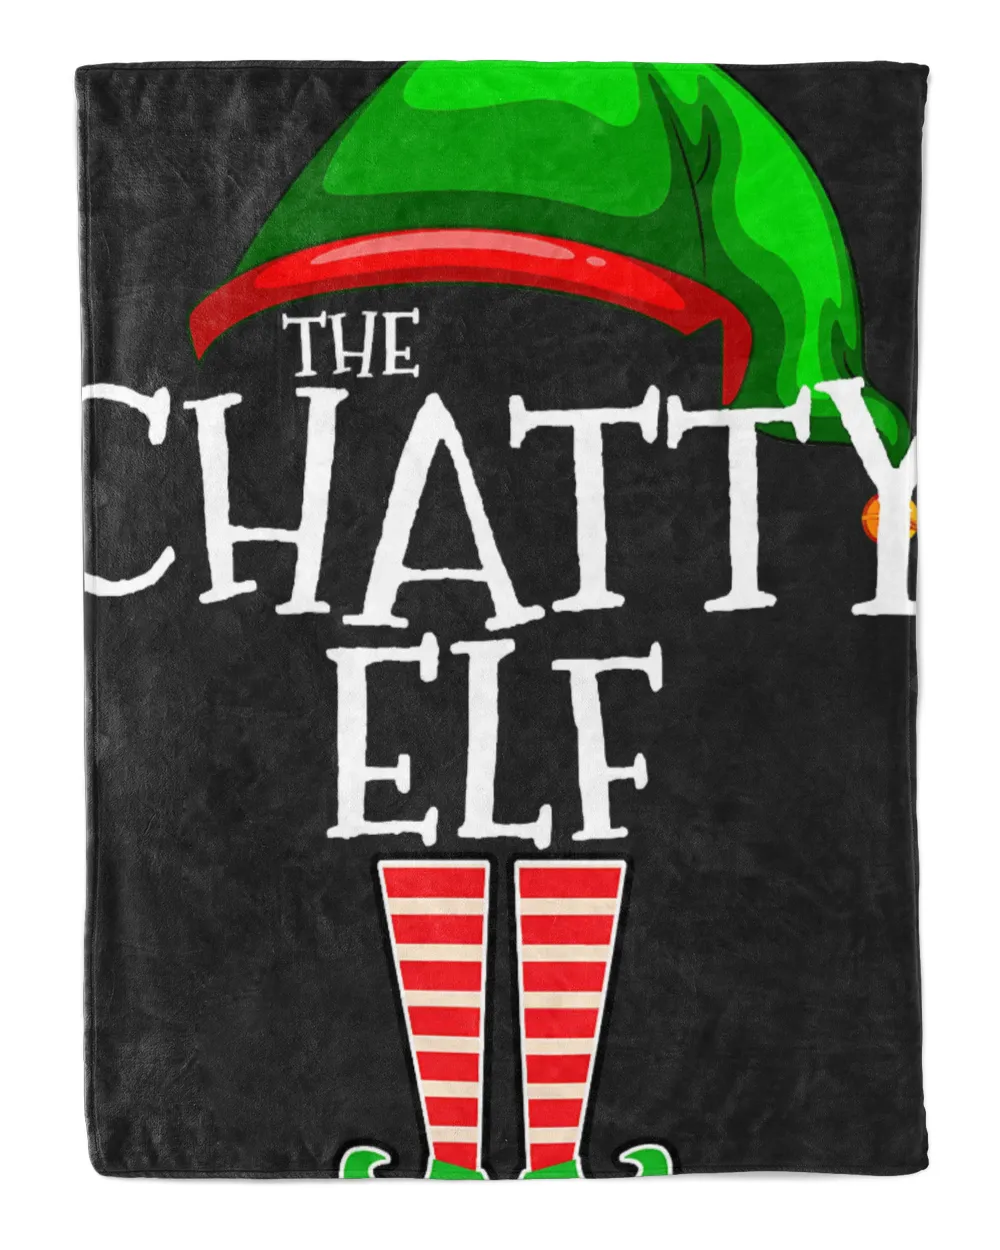 The Chatty Elf Group Matching Family Christmas Gift Funny T-Shirt